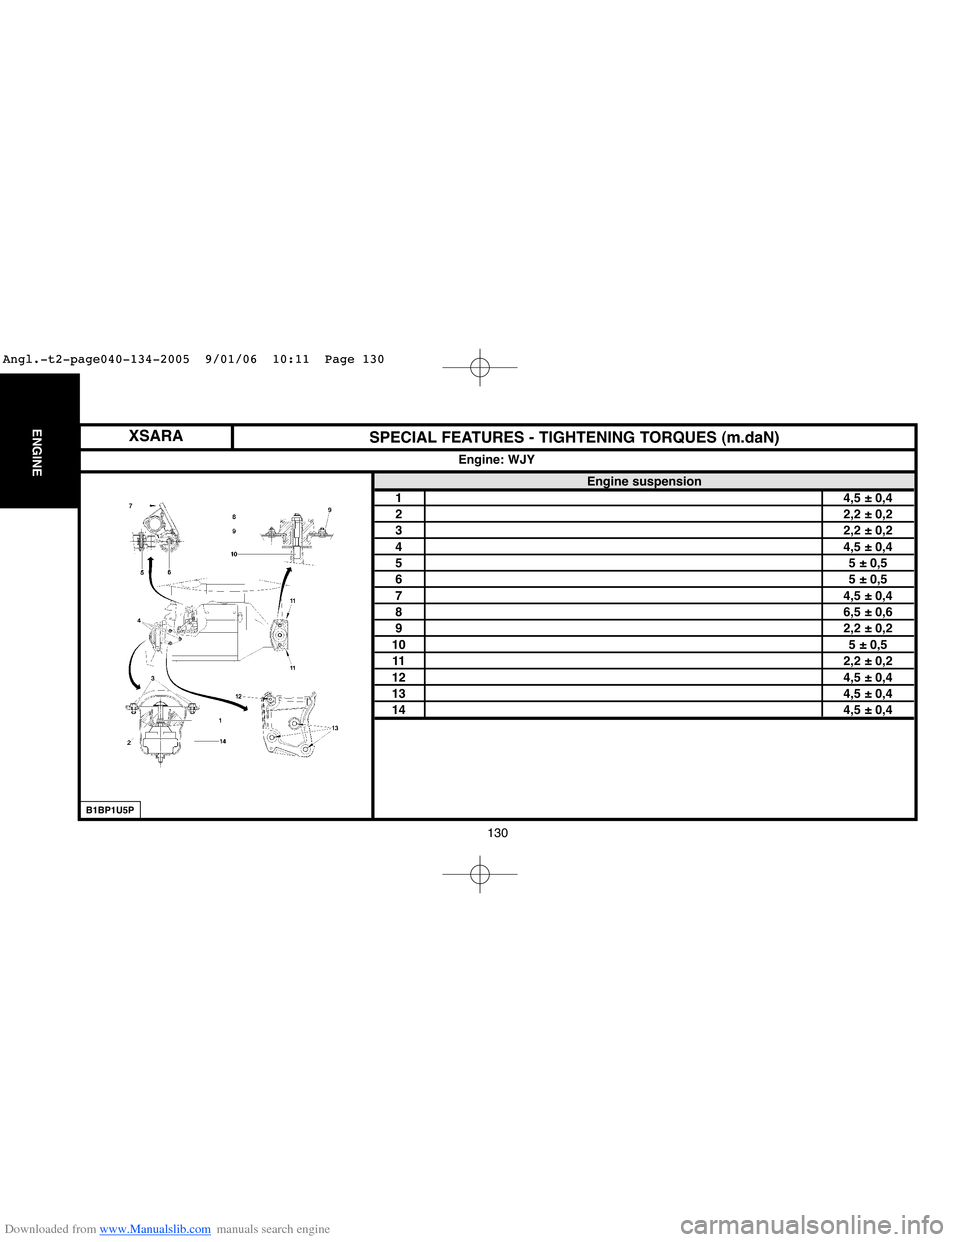 Citroen C4 2005 2.G Repair Manual Downloaded from www.Manualslib.com manuals search engine 130
ENGINESPECIAL FEATURES - TIGHTENING TORQUES (m.daN)
Engine suspension
14,5 ± 0,4
22,2 ± 0,2
32,2 ± 0,2
44,5 ± 0,4
55 ± 0,5
65 ± 0,5
7